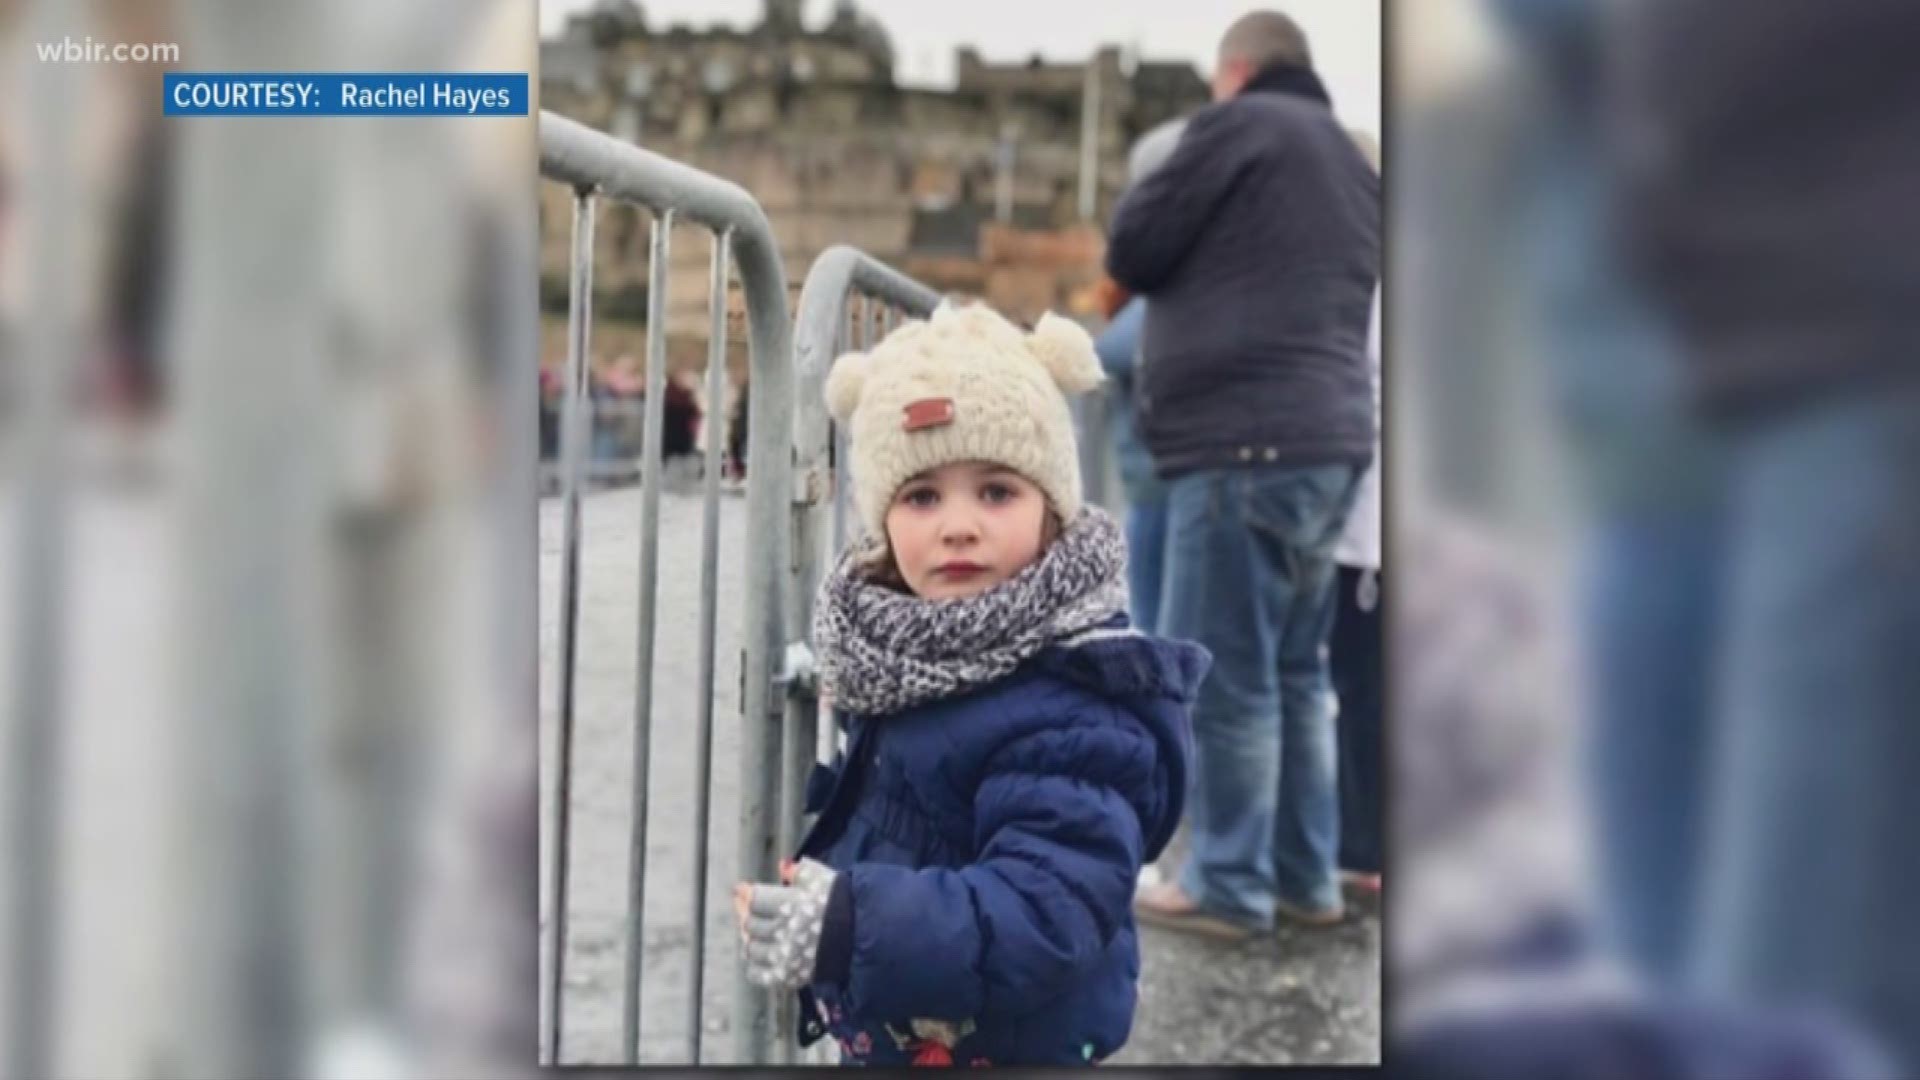 Rachel Hayes, of Kingston,was in Scotland in February visiting her son and his family. A chance trip to a famous castle put them face to face with Prince Harry and his fiance.May 14, 2018-4pm